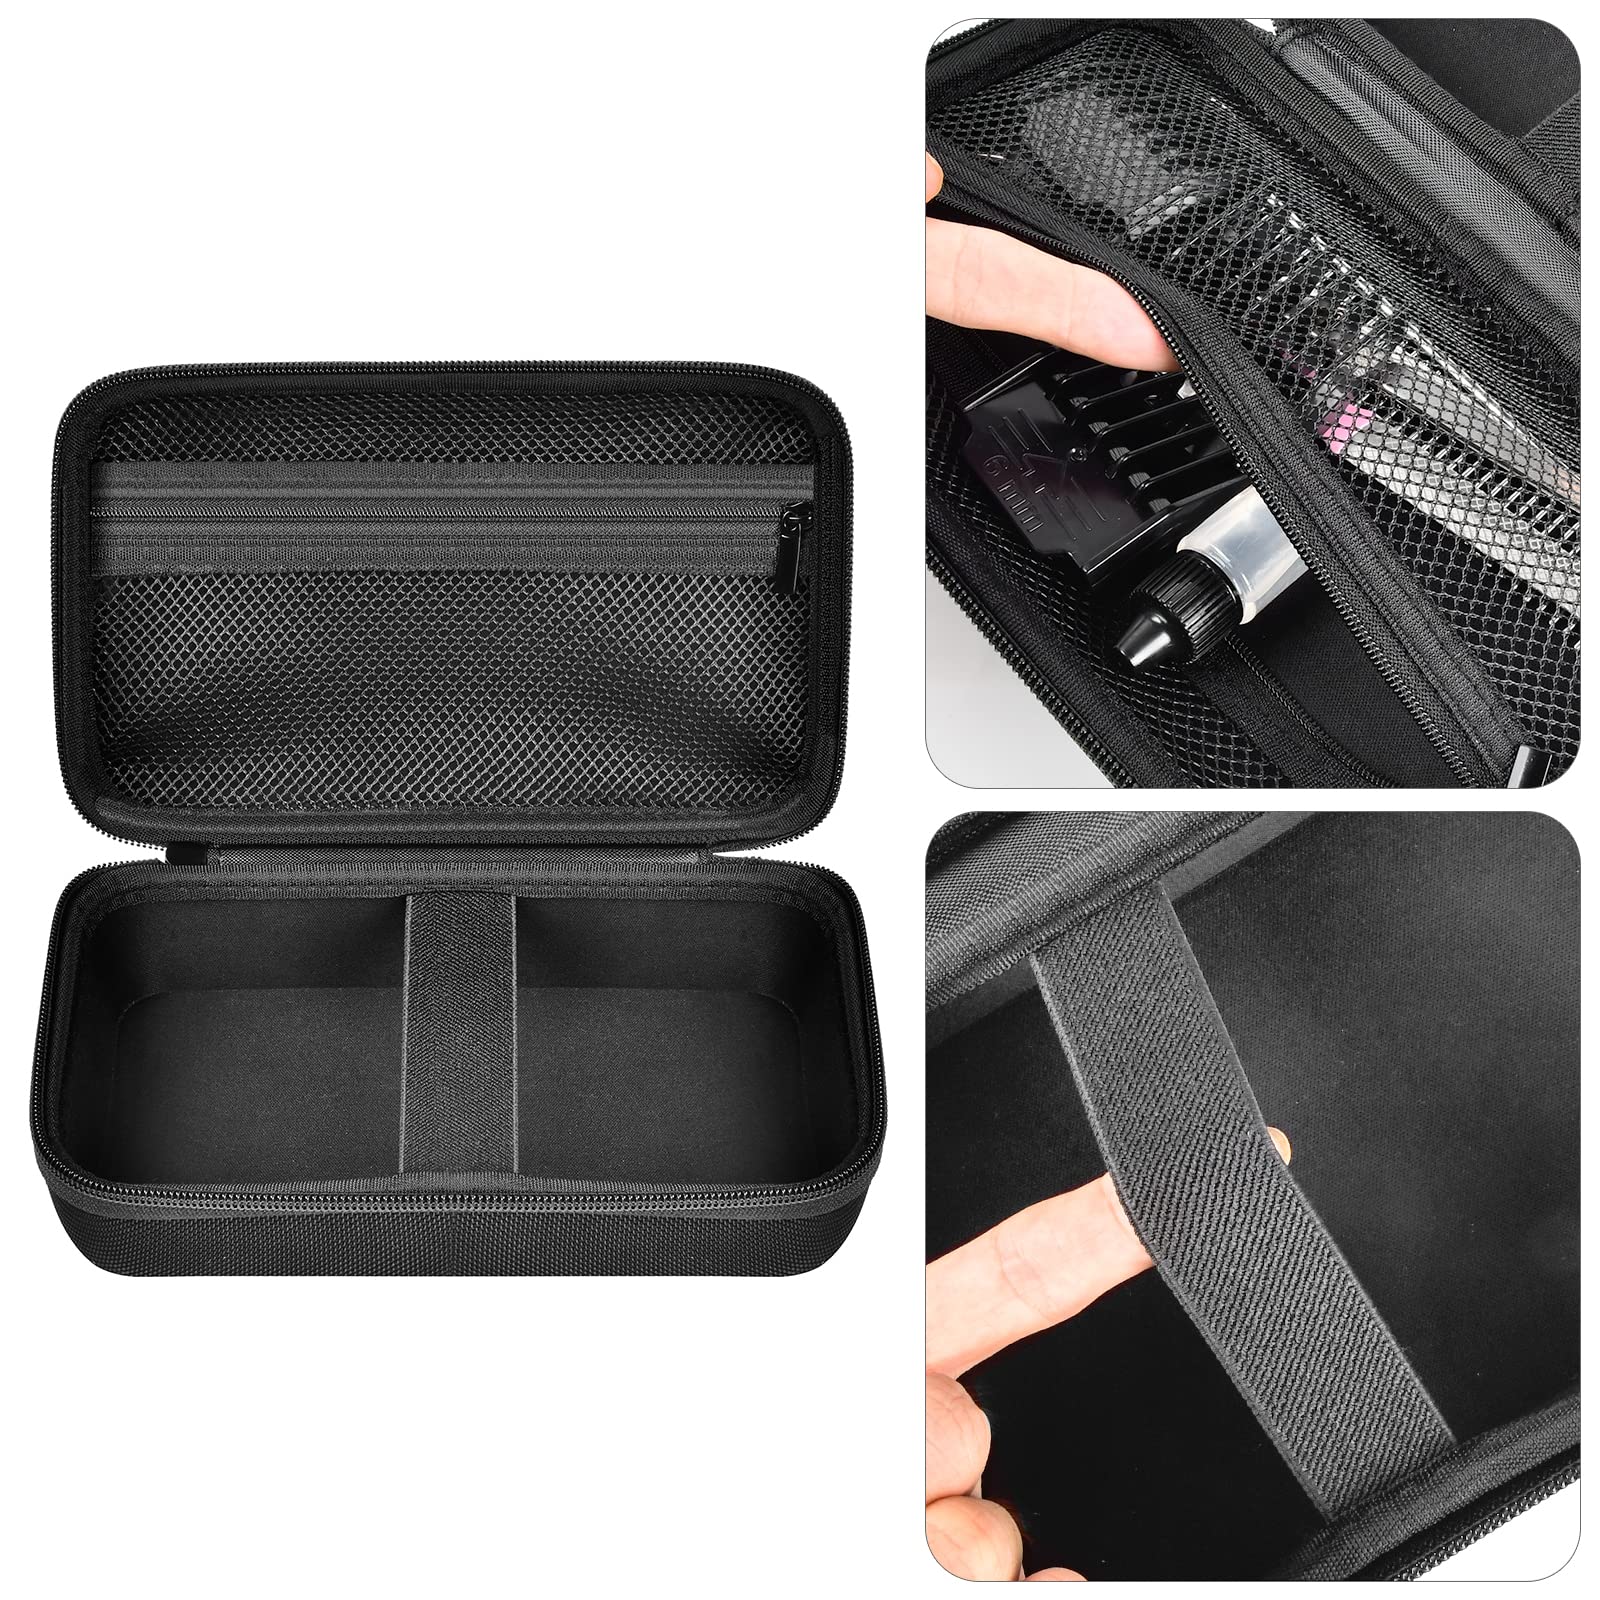 Case Compatible with Hair Clipper Barber, Trimmer Travel Storage Organizer for T Finisher Liner, Comb Cutting Guide, Clipper Blade Oil, Cleaning Brush and Other Grooming Kit - Black Case+Black Zipper